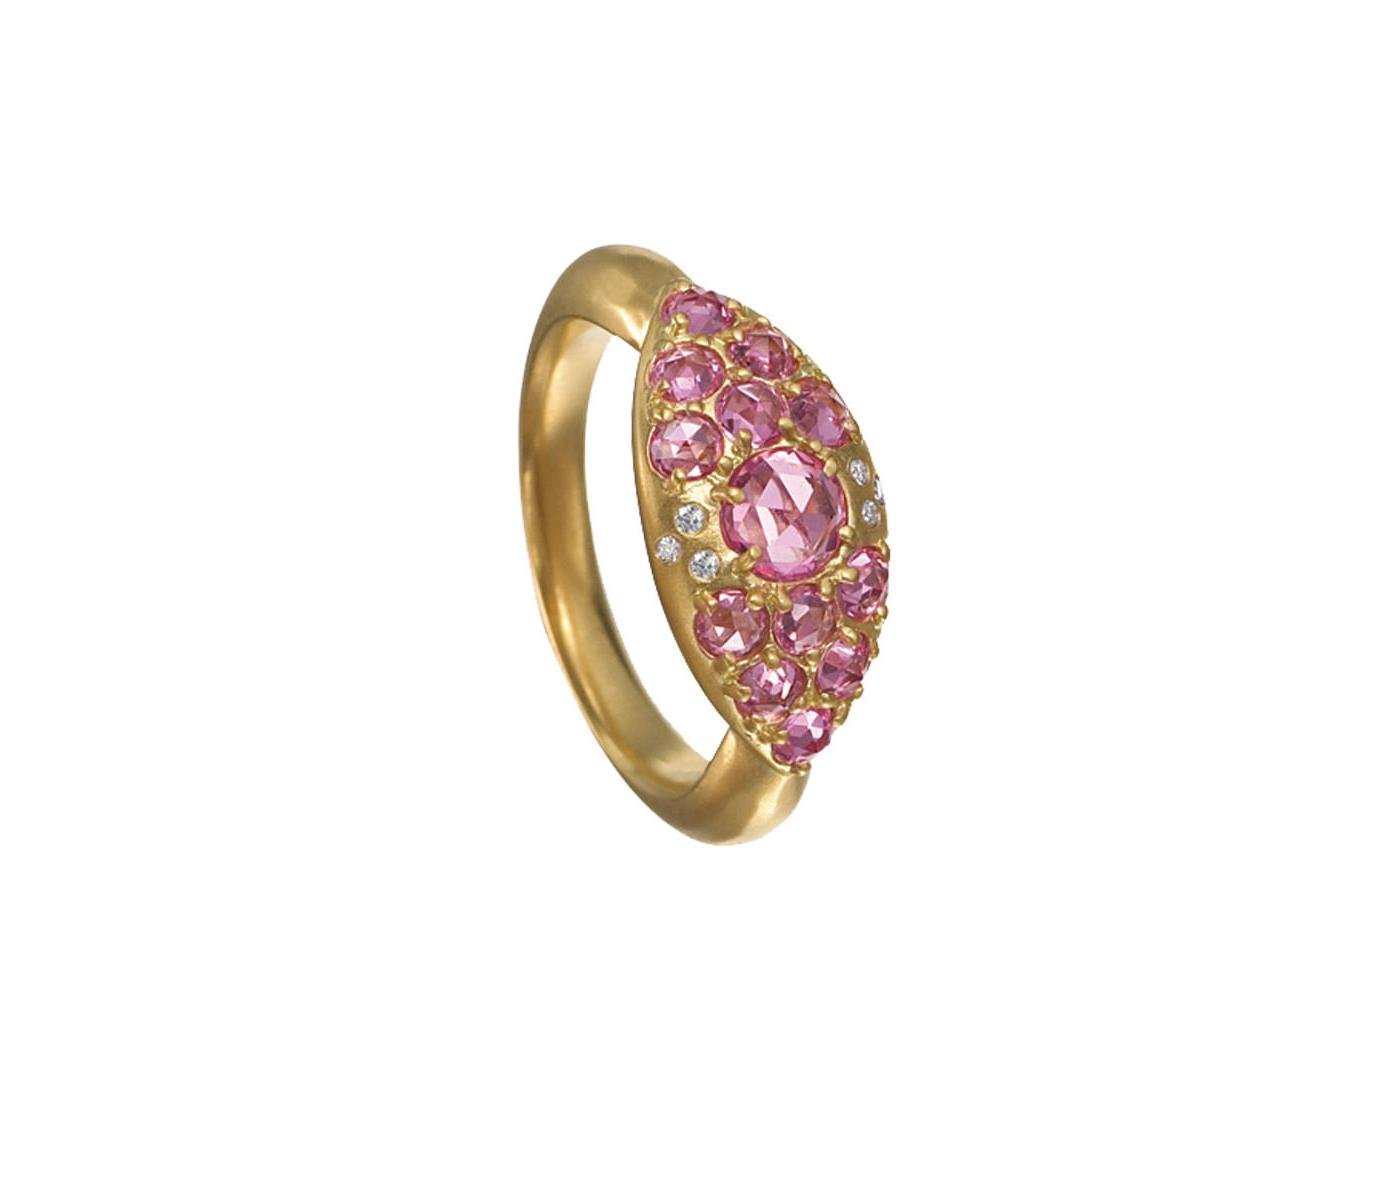 Ring by Alberian & Aulde